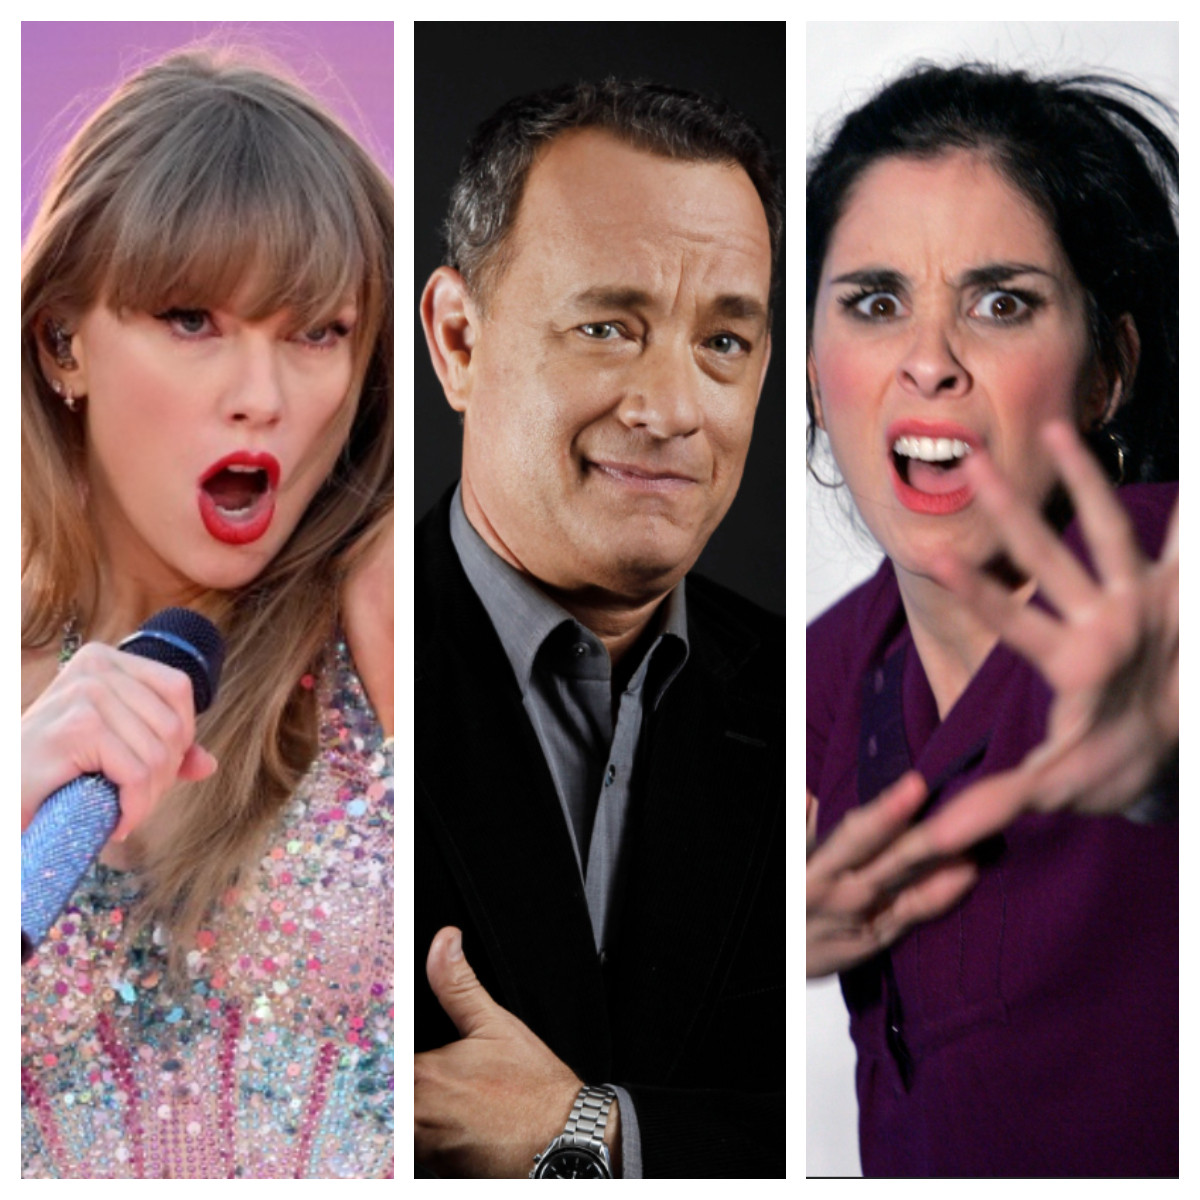 Taylor Swift, Tom Hanks and Sarah Silverman have all felt the effects of AI on their careers. Photos: AP